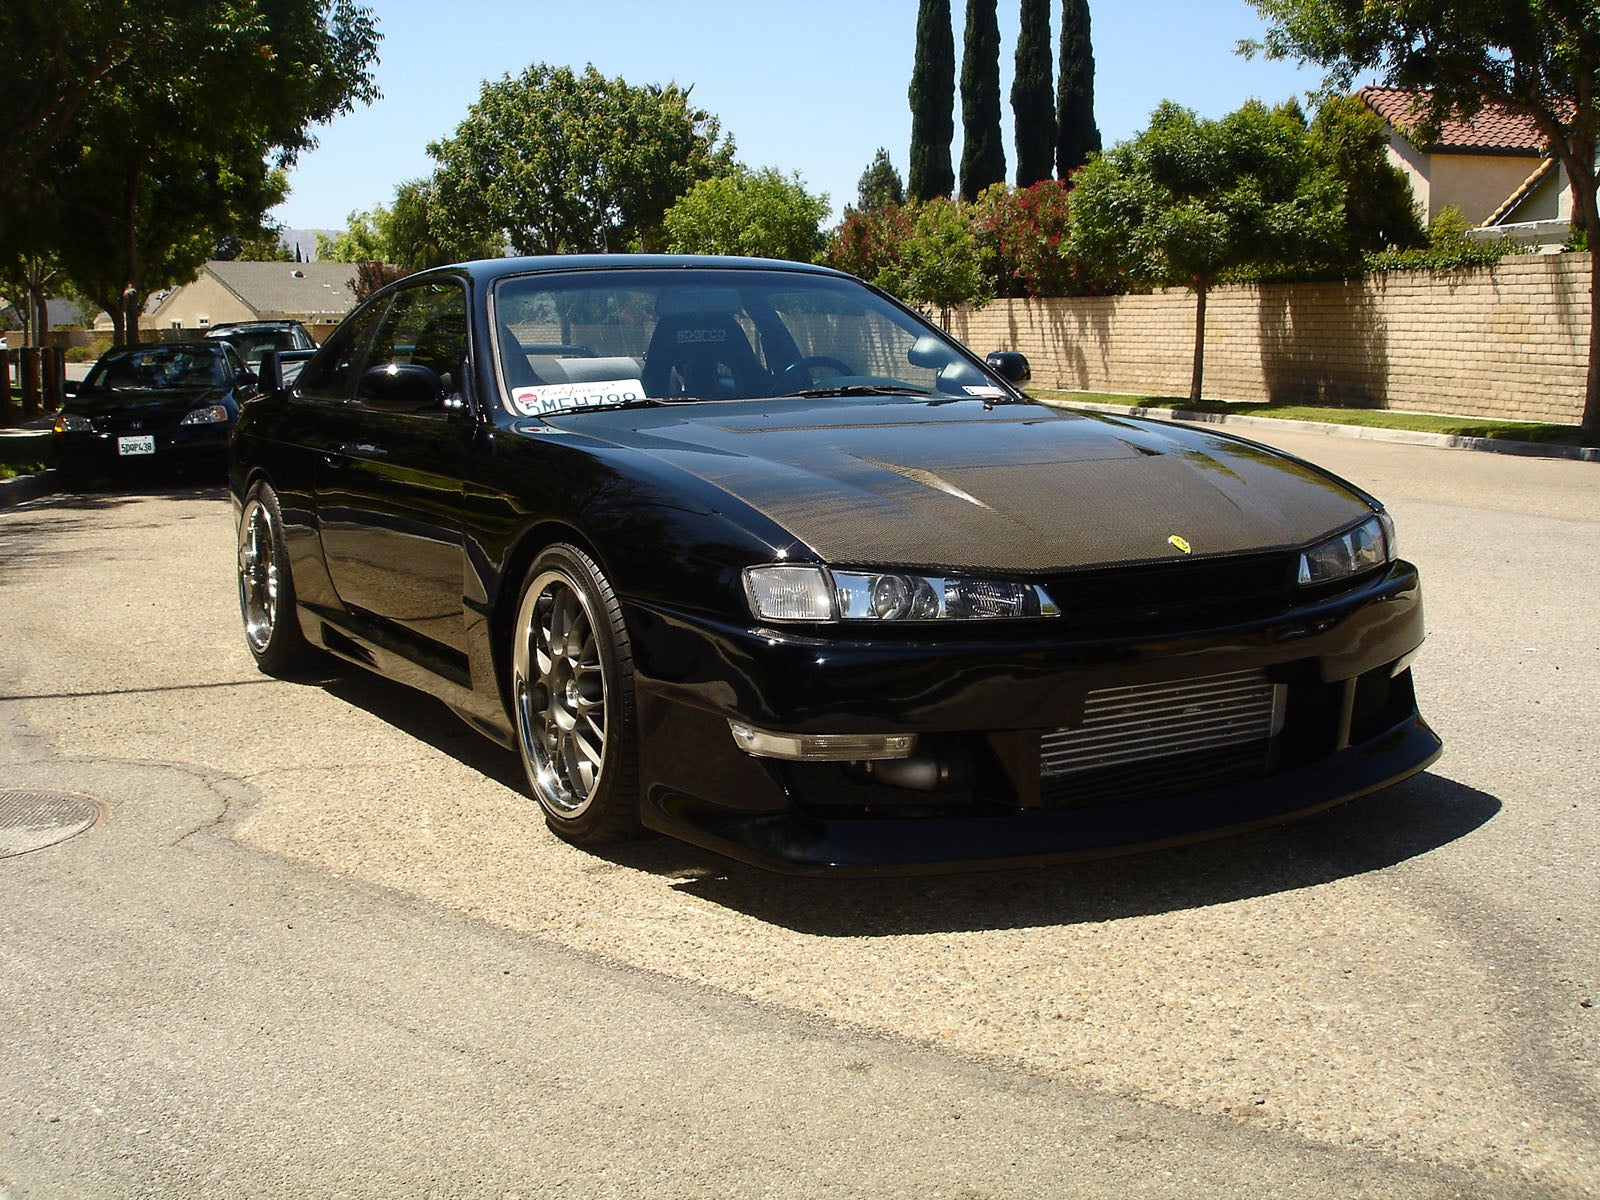 1998 Nissan silvia s14 for sale